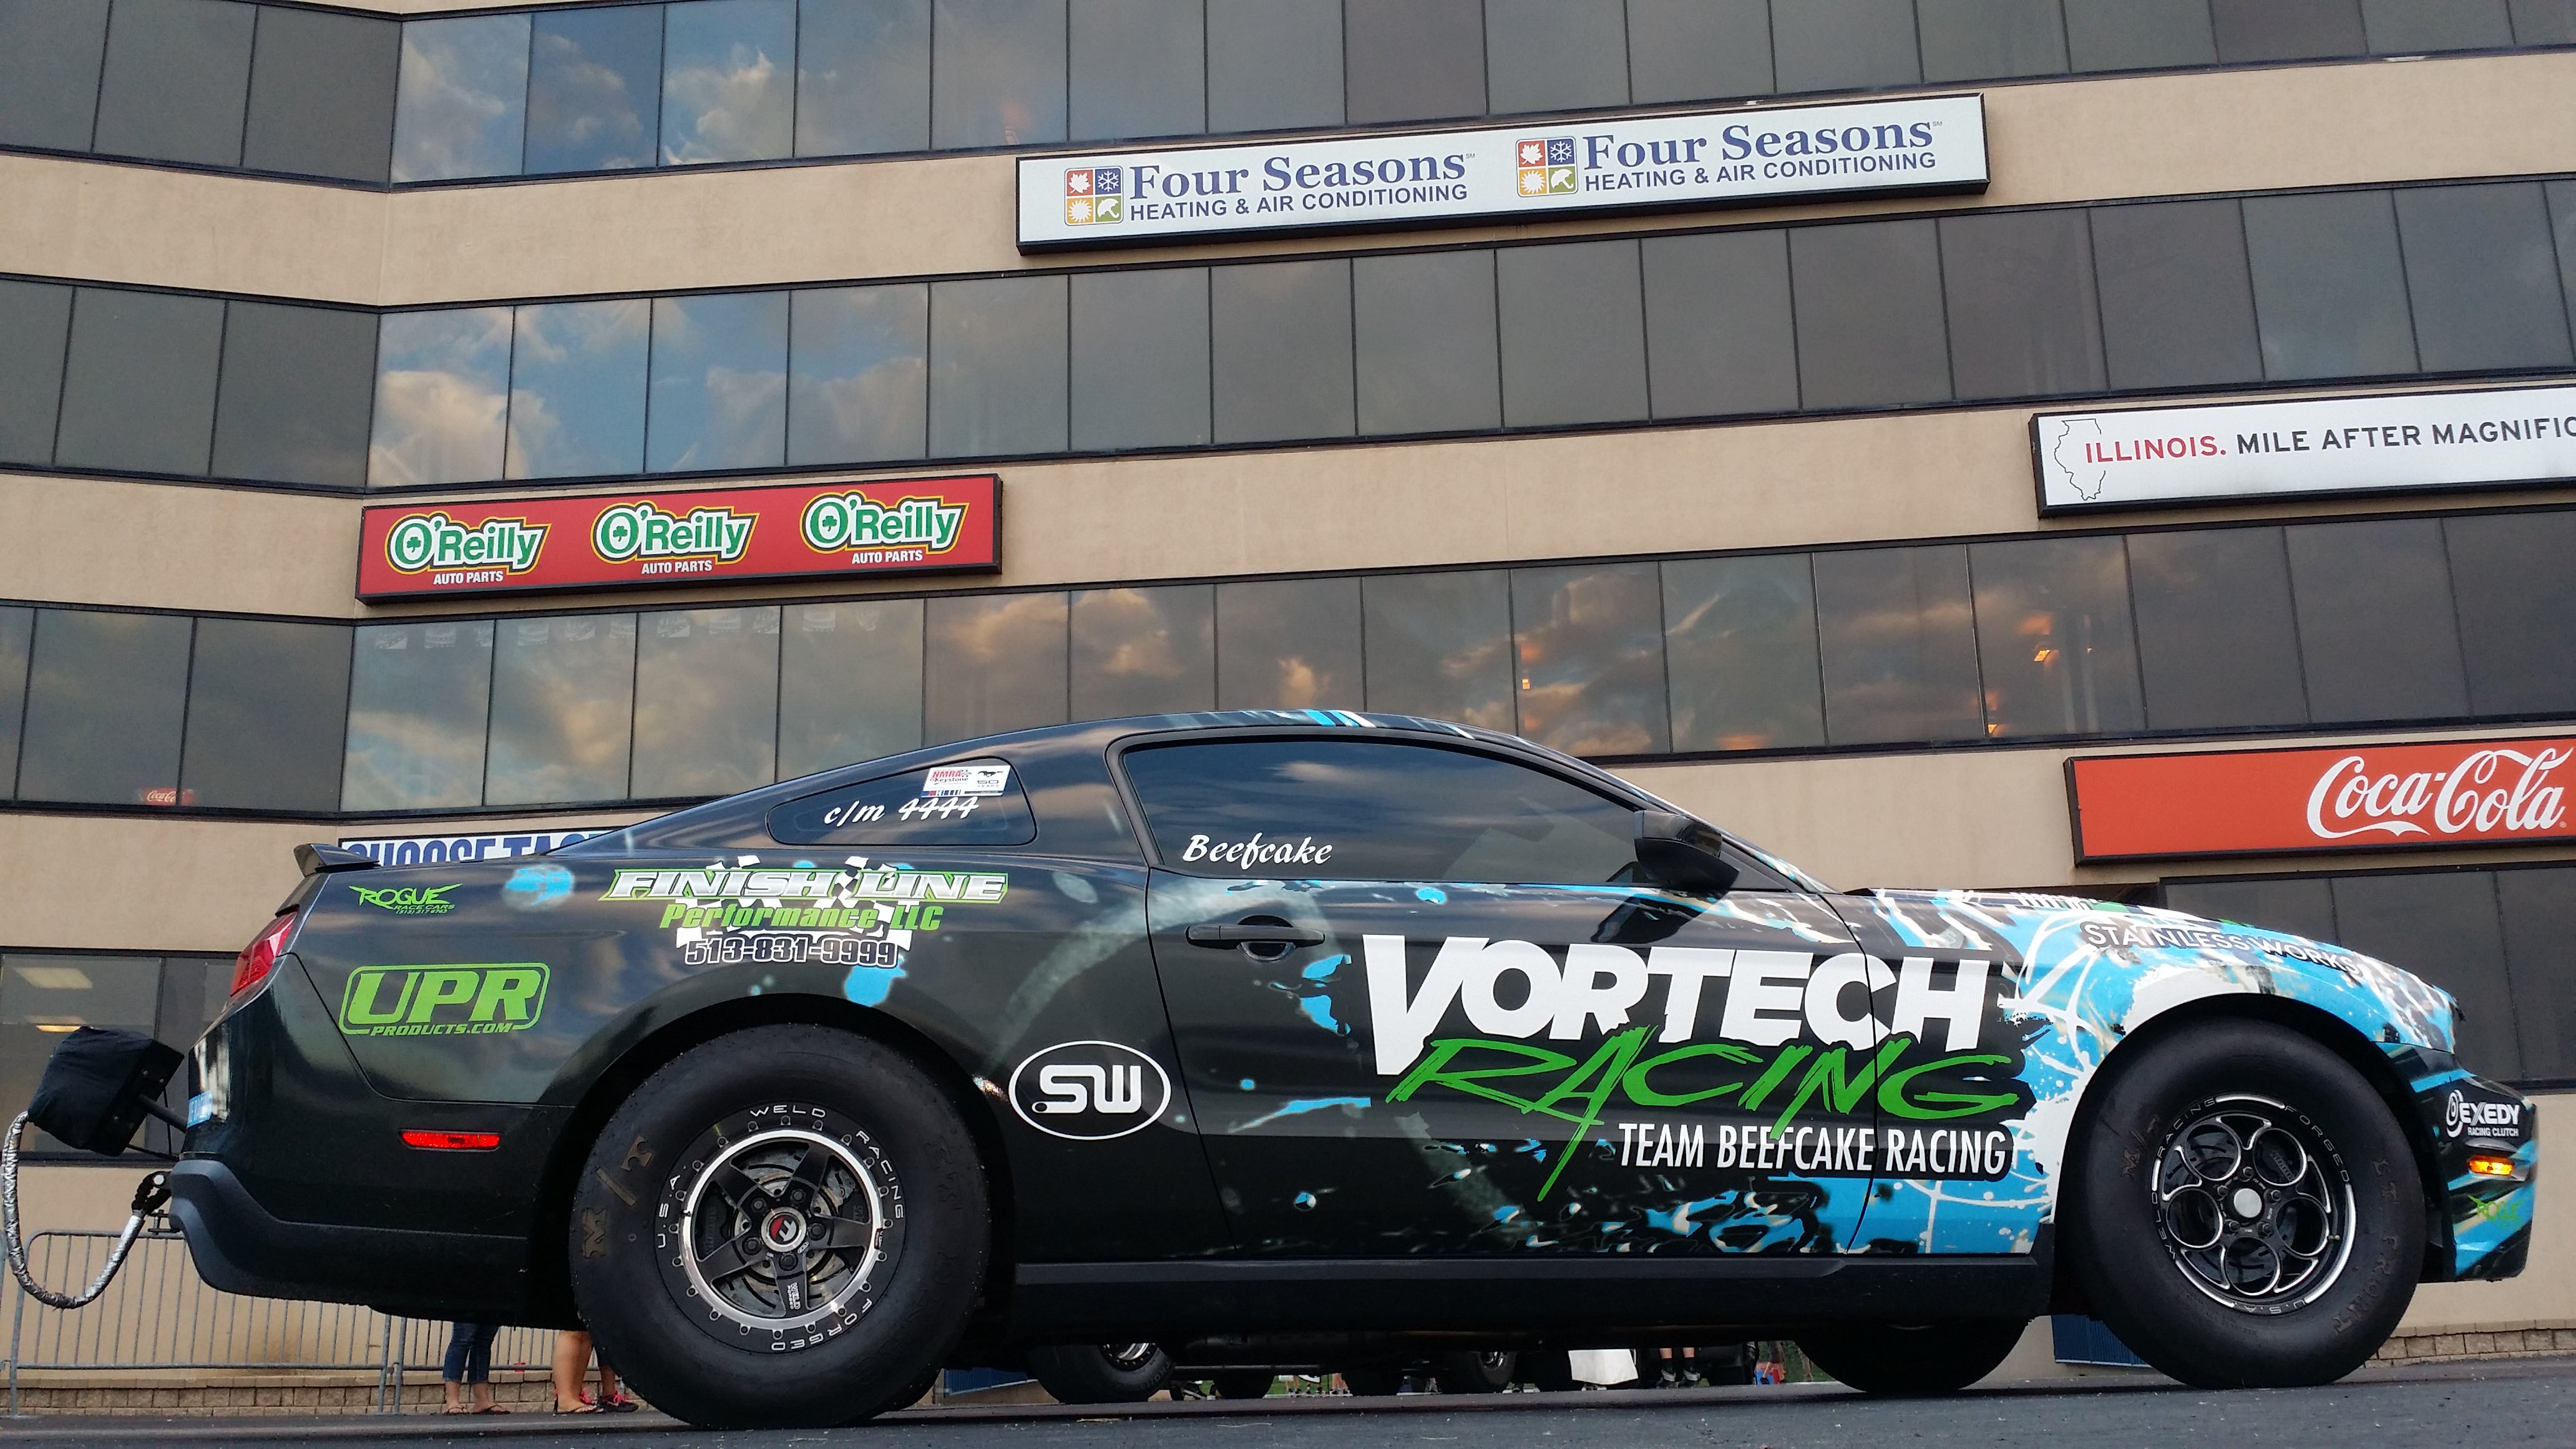 Terry "Beefcake" Reeves Wins Coyote Modified With his Vortech V-7 JT Supercharged Mustang